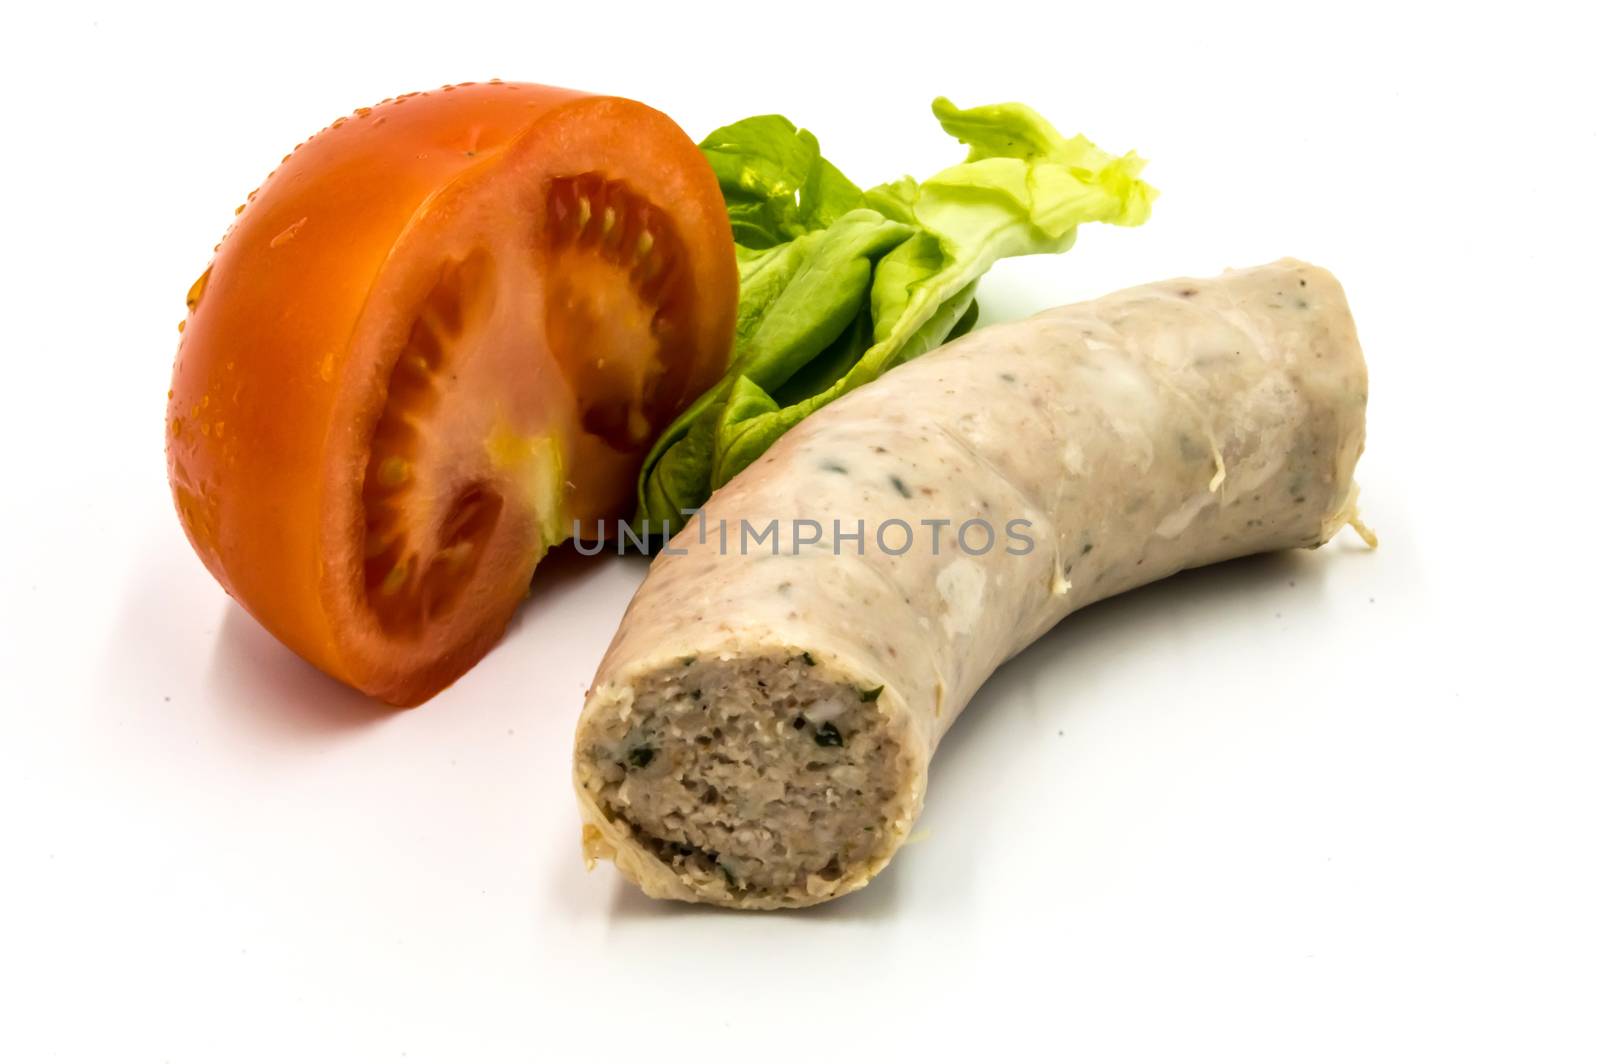 Piece of white sausage on a white background with half a tomato and a salad leaf